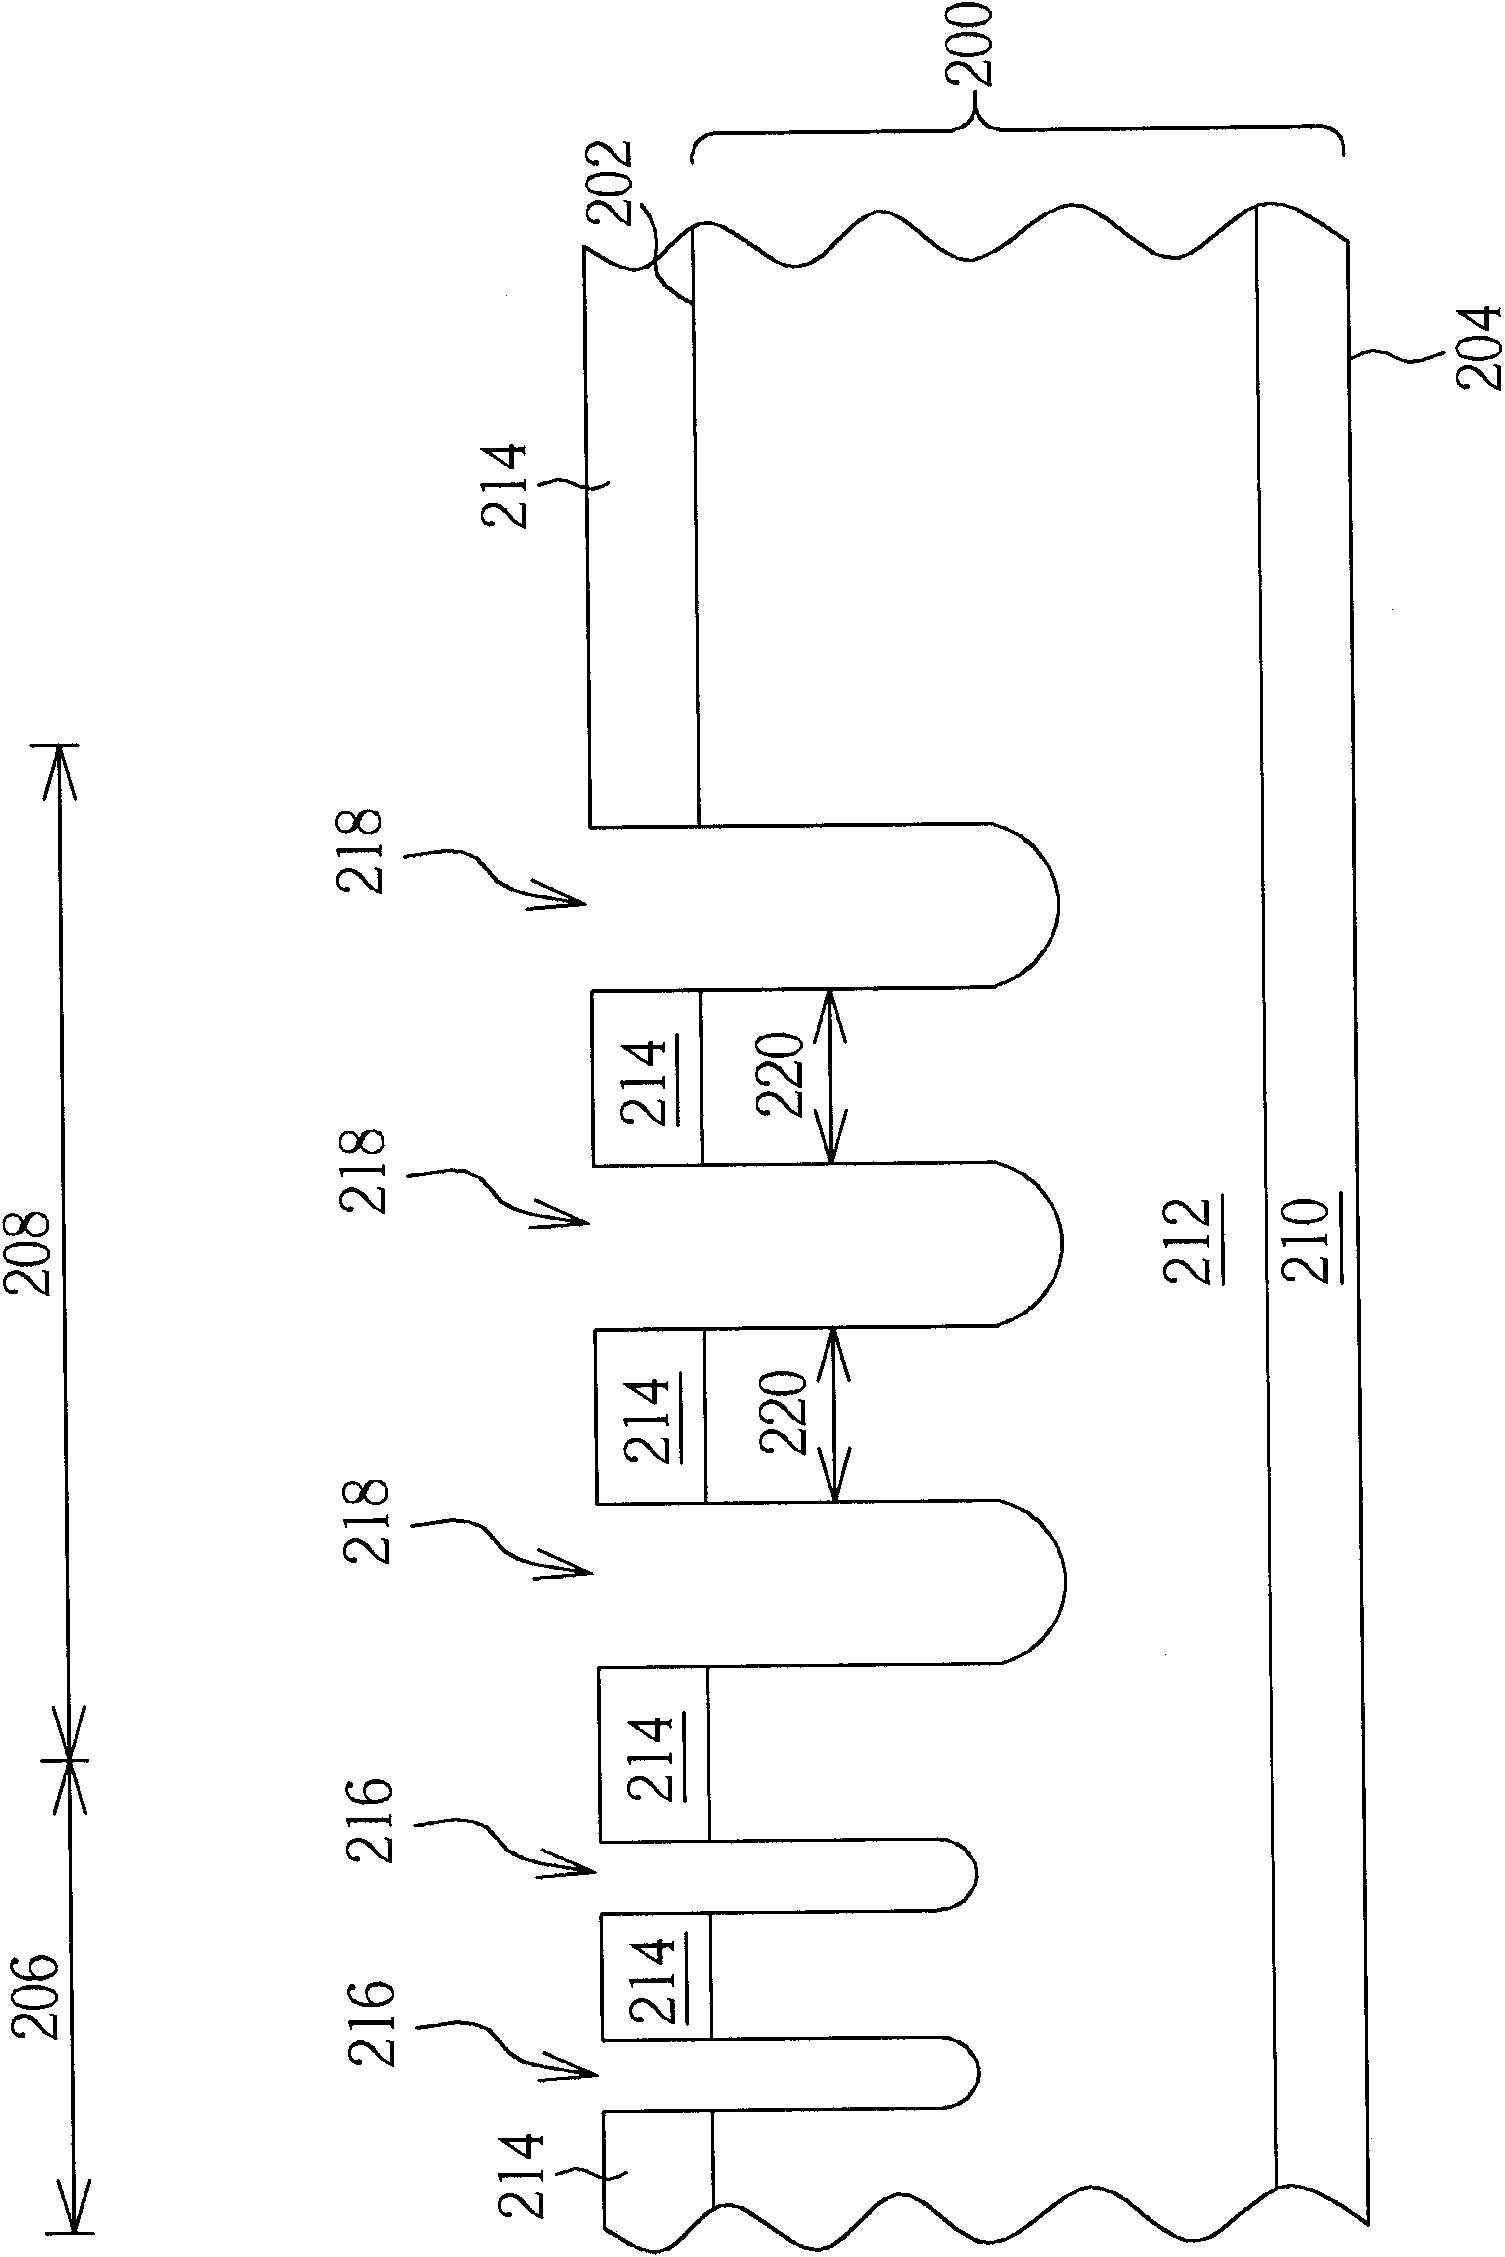 Integration of metal-oxide-semiconductor field-effect transistor (MOSFET) and Schottky diode and method for manufacturing same